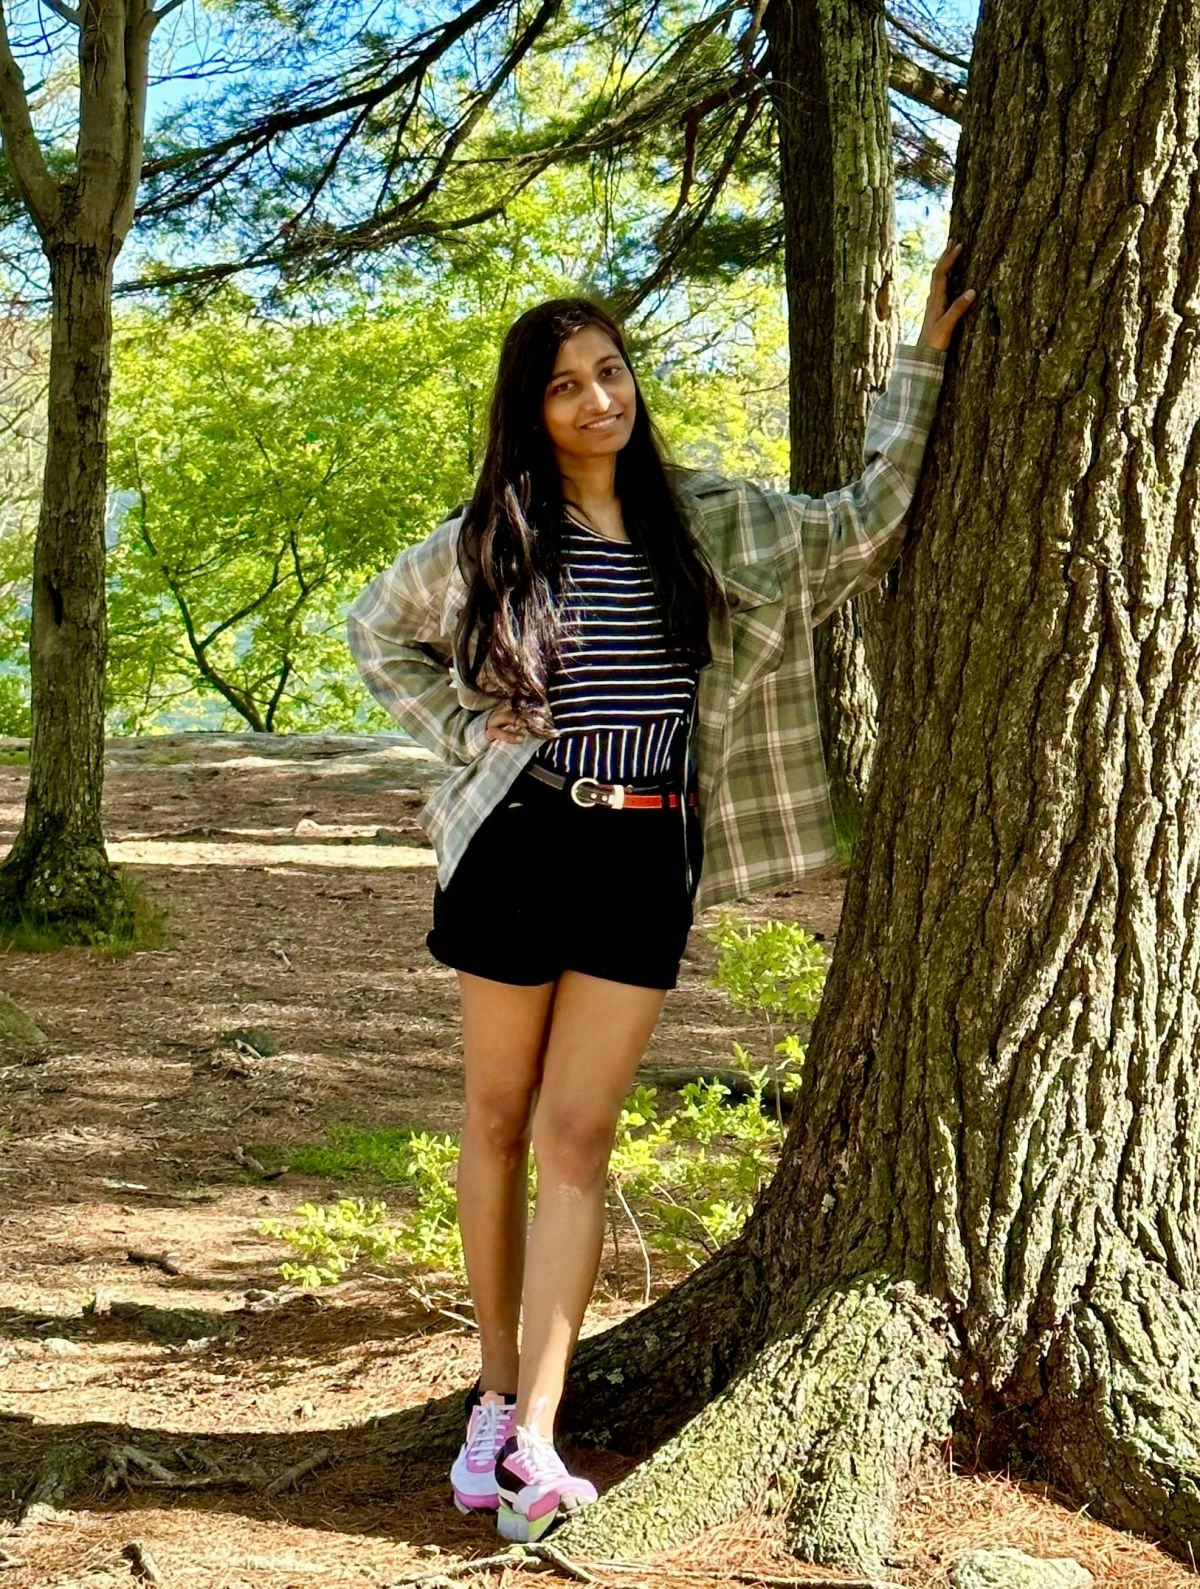 Photo of Shivani Bhawsar hiking in the woods, standing next to a tree